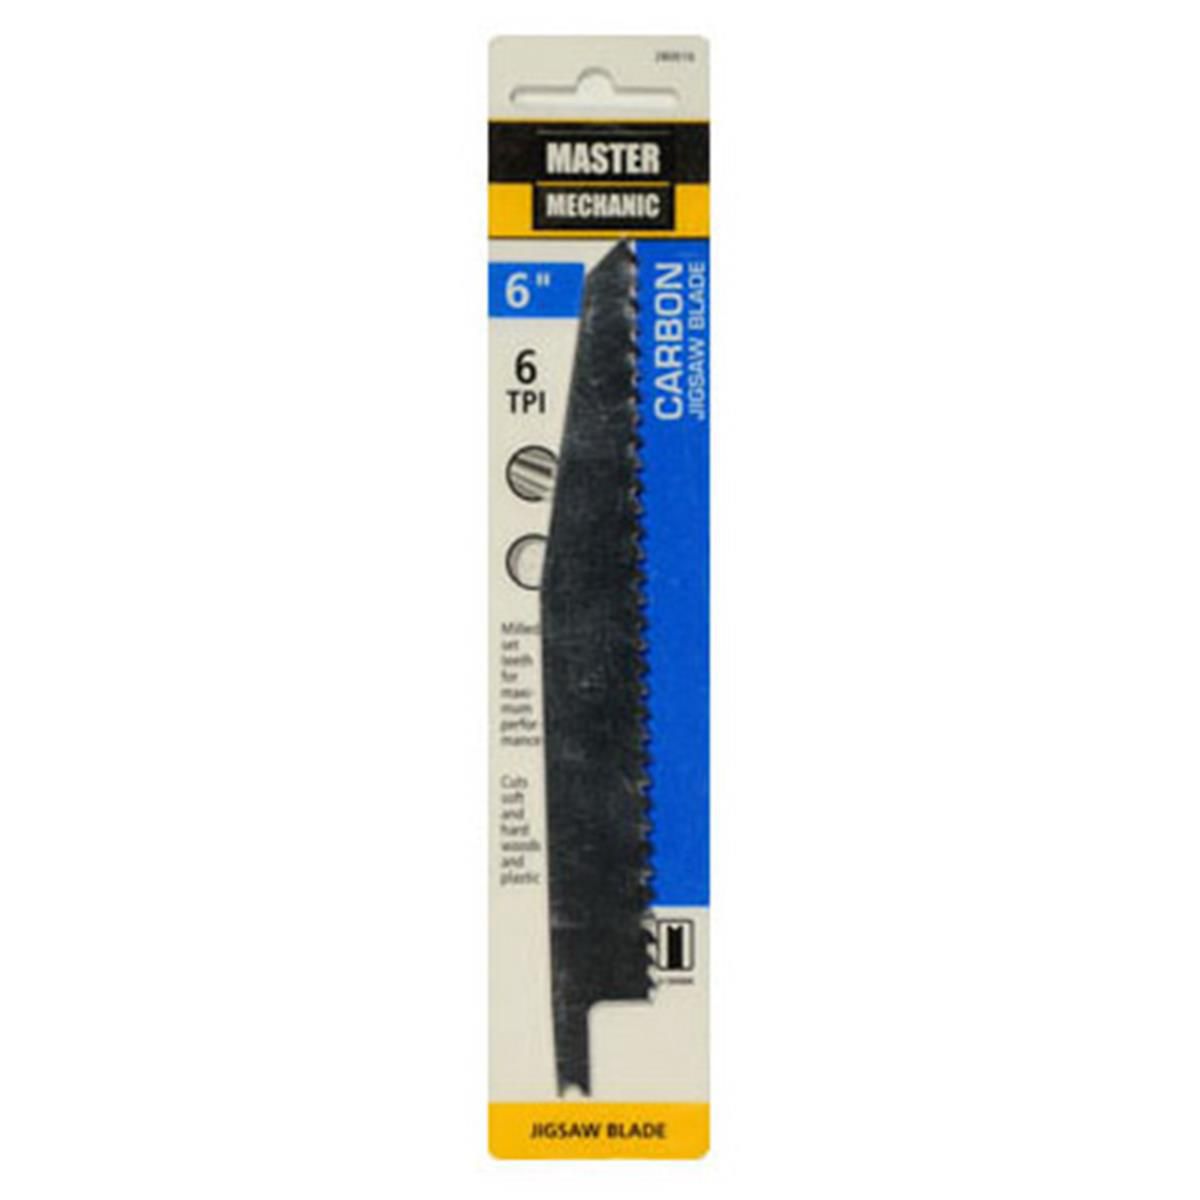 Image for Disston 280016 6 in. 6 Tooth Master Mechanic Jig Saw Blade Pack of 5 at Kohl's.